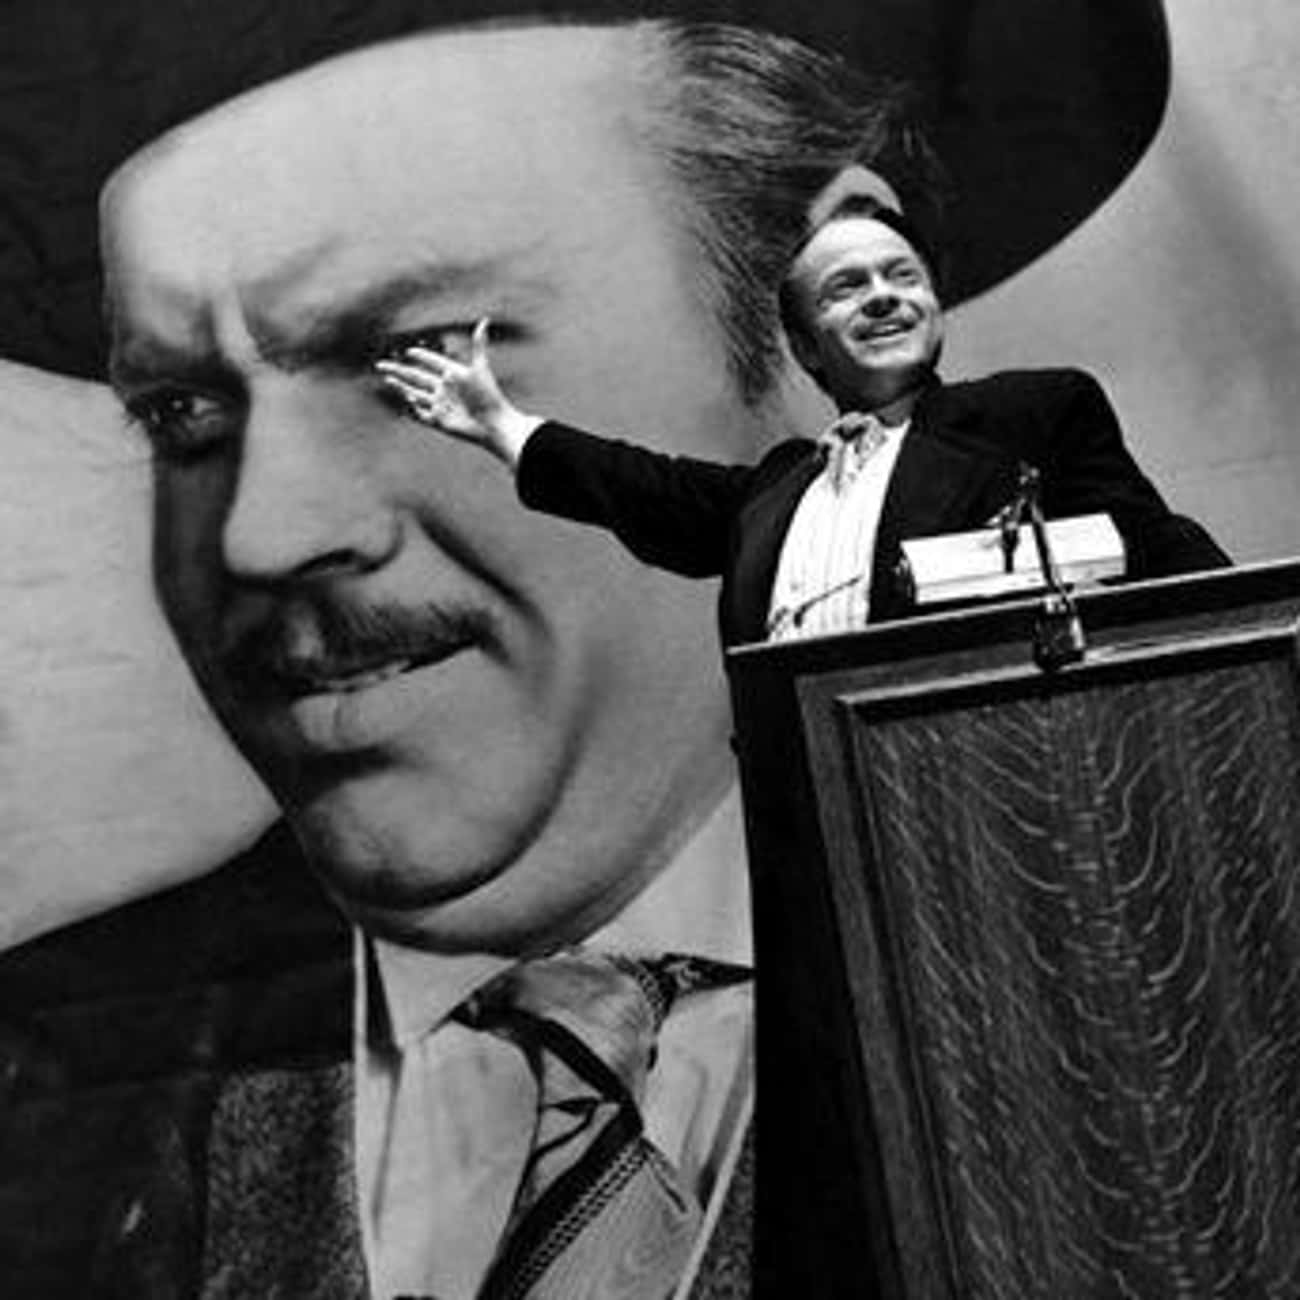 Citizen Kane Has Long Been Referred To As The Greatest Film Of All Time